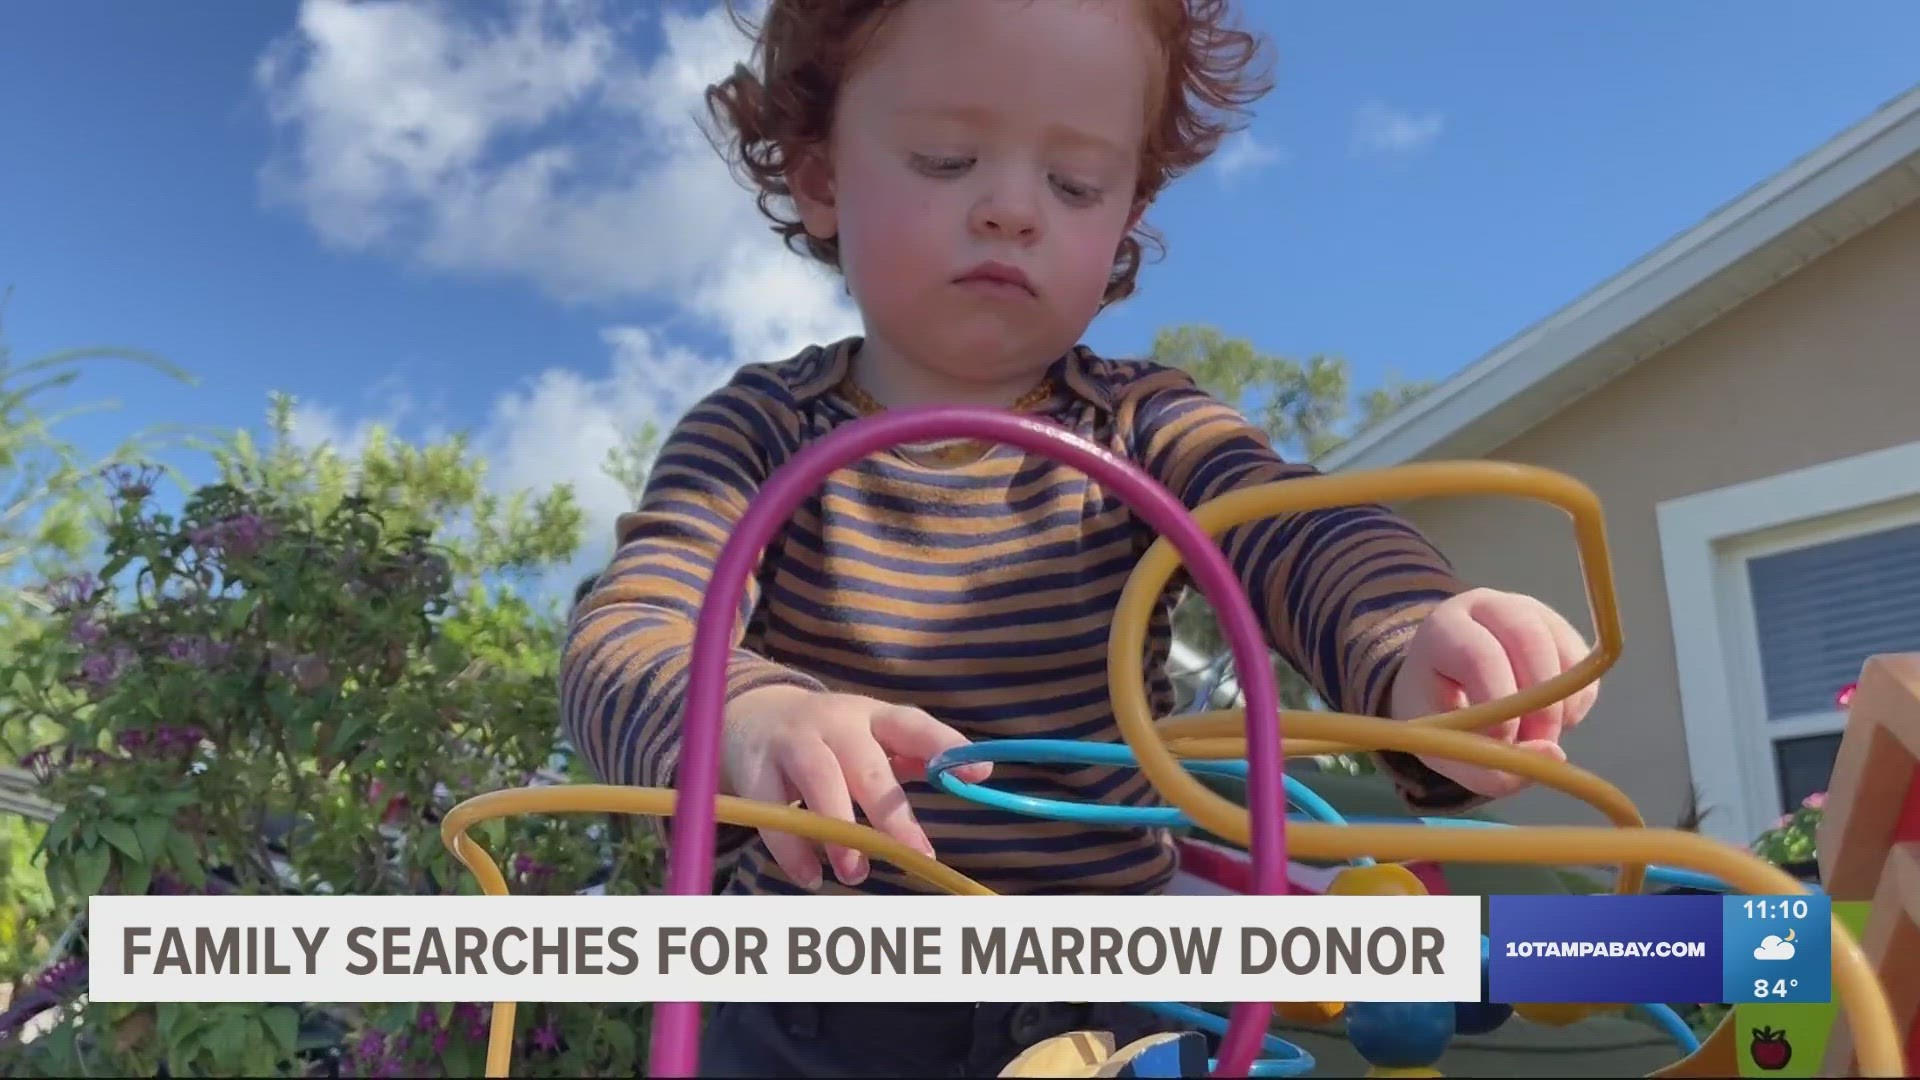 According to "Be The Match," there are more an 9 million potential donors in the United States.